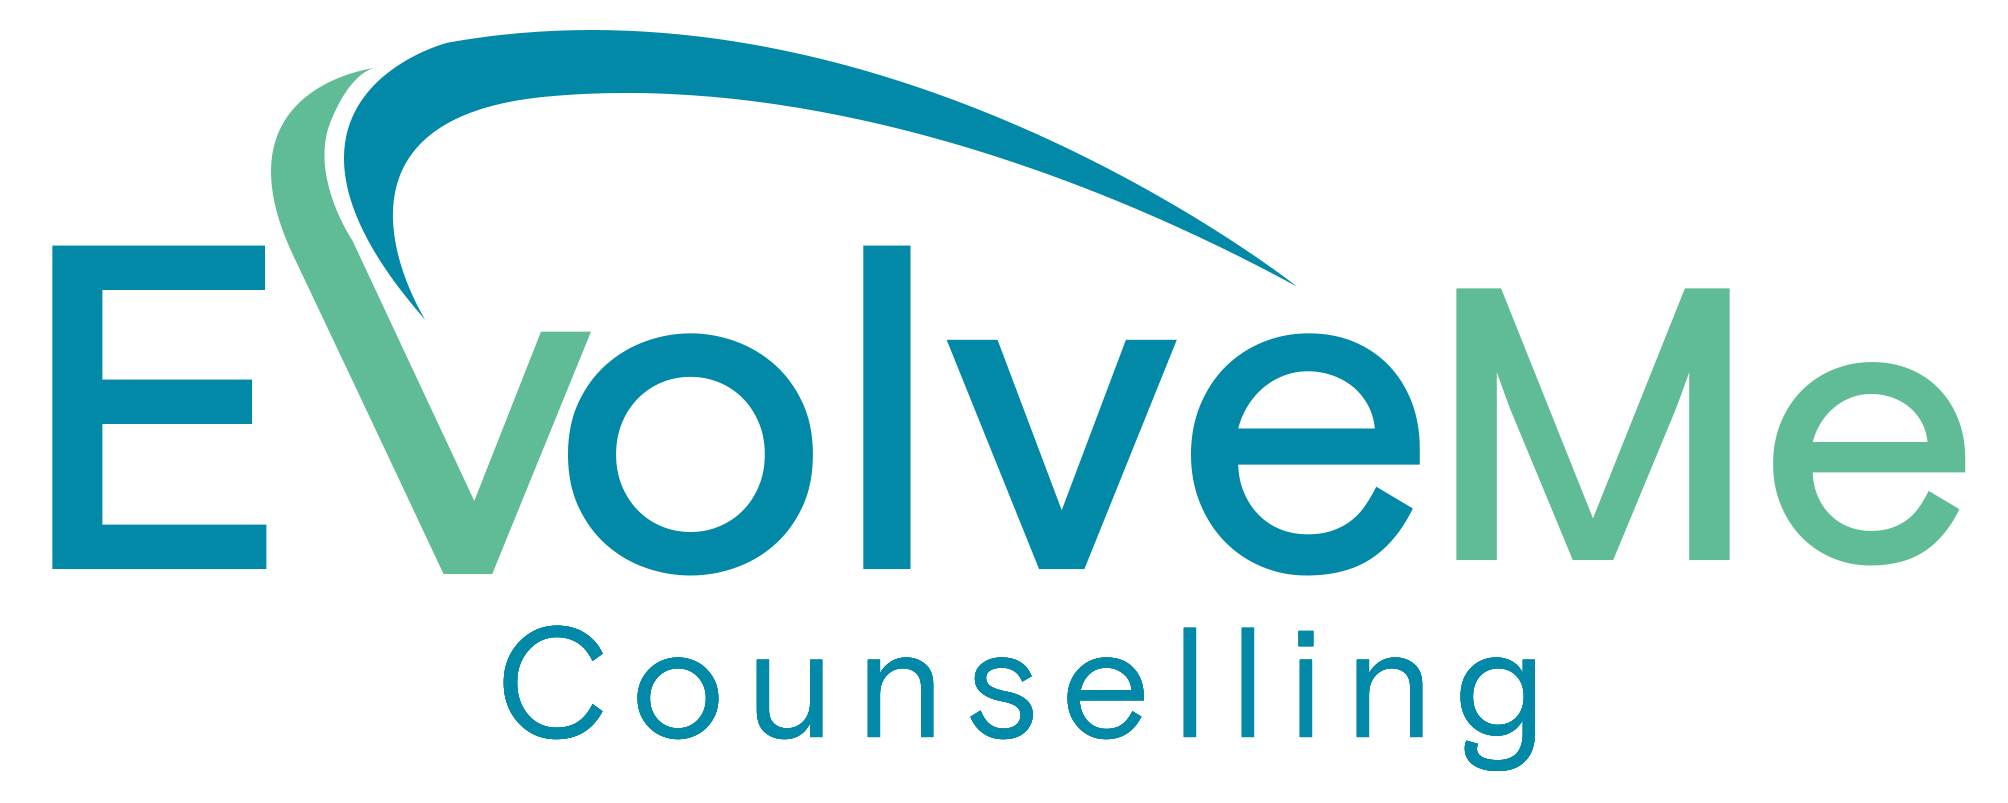 Evolveme Counselling